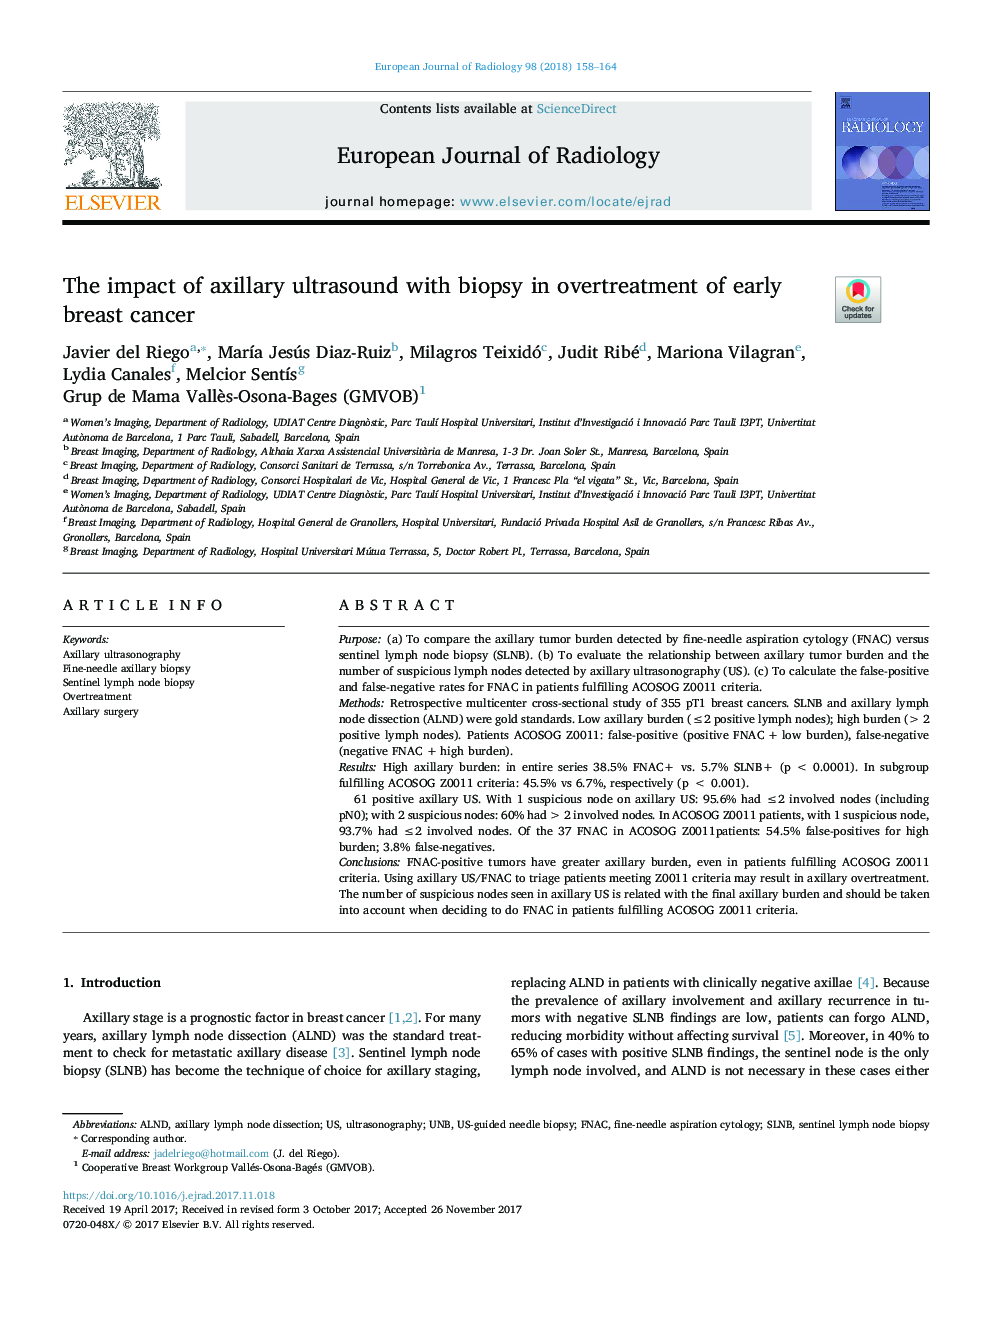 The impact of axillary ultrasound with biopsy in overtreatment of early breast cancer